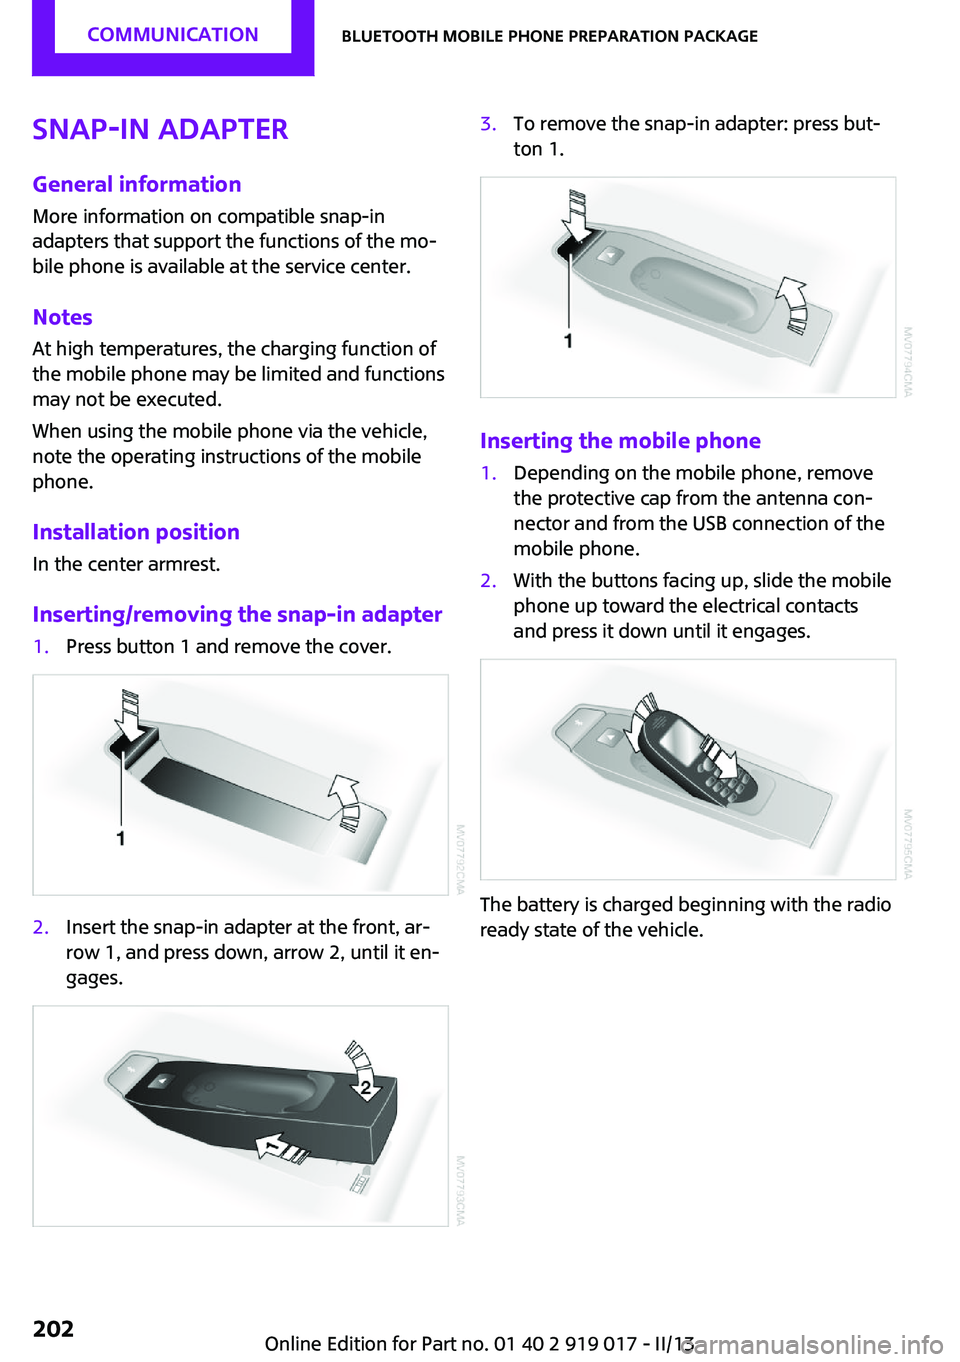 MINI COOPER CONVERTIBLE 2013  Owners Manual Snap-in adapter
General information More information on compatible snap-in
adapters that support the functions of the mo‐
bile phone is available at the service center.
Notes At high temperatures, t